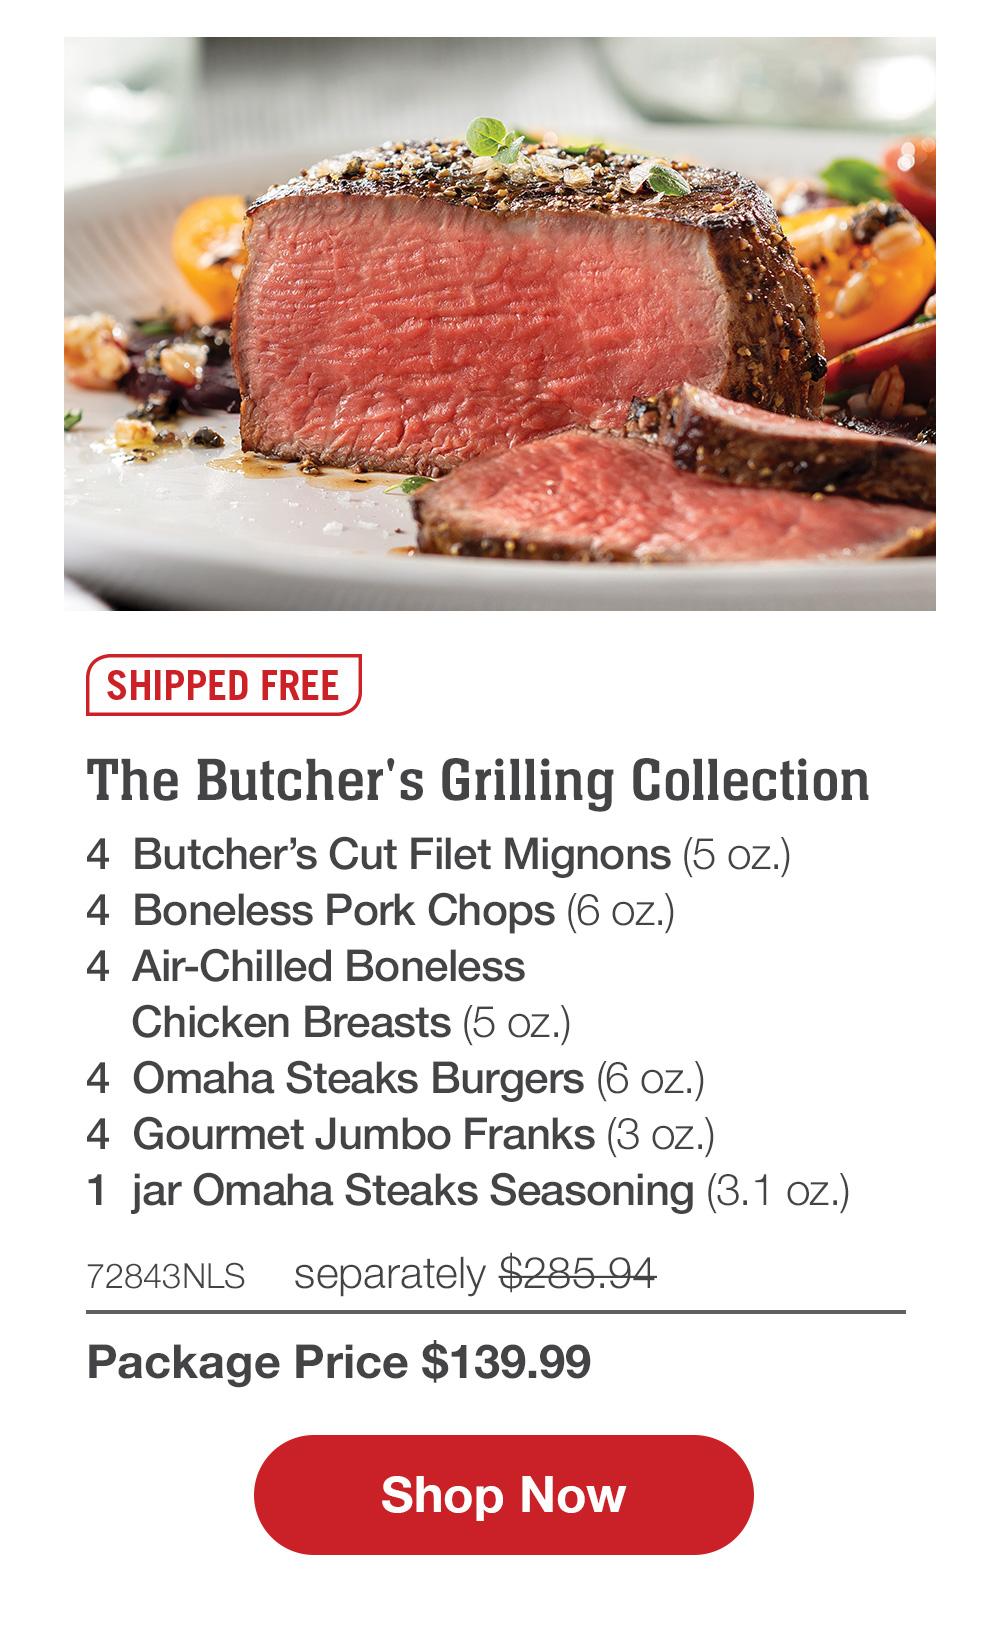 SHIPPED FREE | The Butcher's Grilling Collection - 4 Butcher's Cut Filet Mignons (5 oz.) - 4 Boneless Pork Chops (6 oz.) - 4 Air-Chilled Boneless Chicken Breasts (5 oz.) - 4 Omaha Steaks Burgers (6 oz.) - 4 Gourmet Jumbo Franks (3 oz.) - 1 jar Omaha Steaks Seasoning (3.1 oz.) - 72843NLS separately $285.94 | Package Price $139.99 || Shop Now